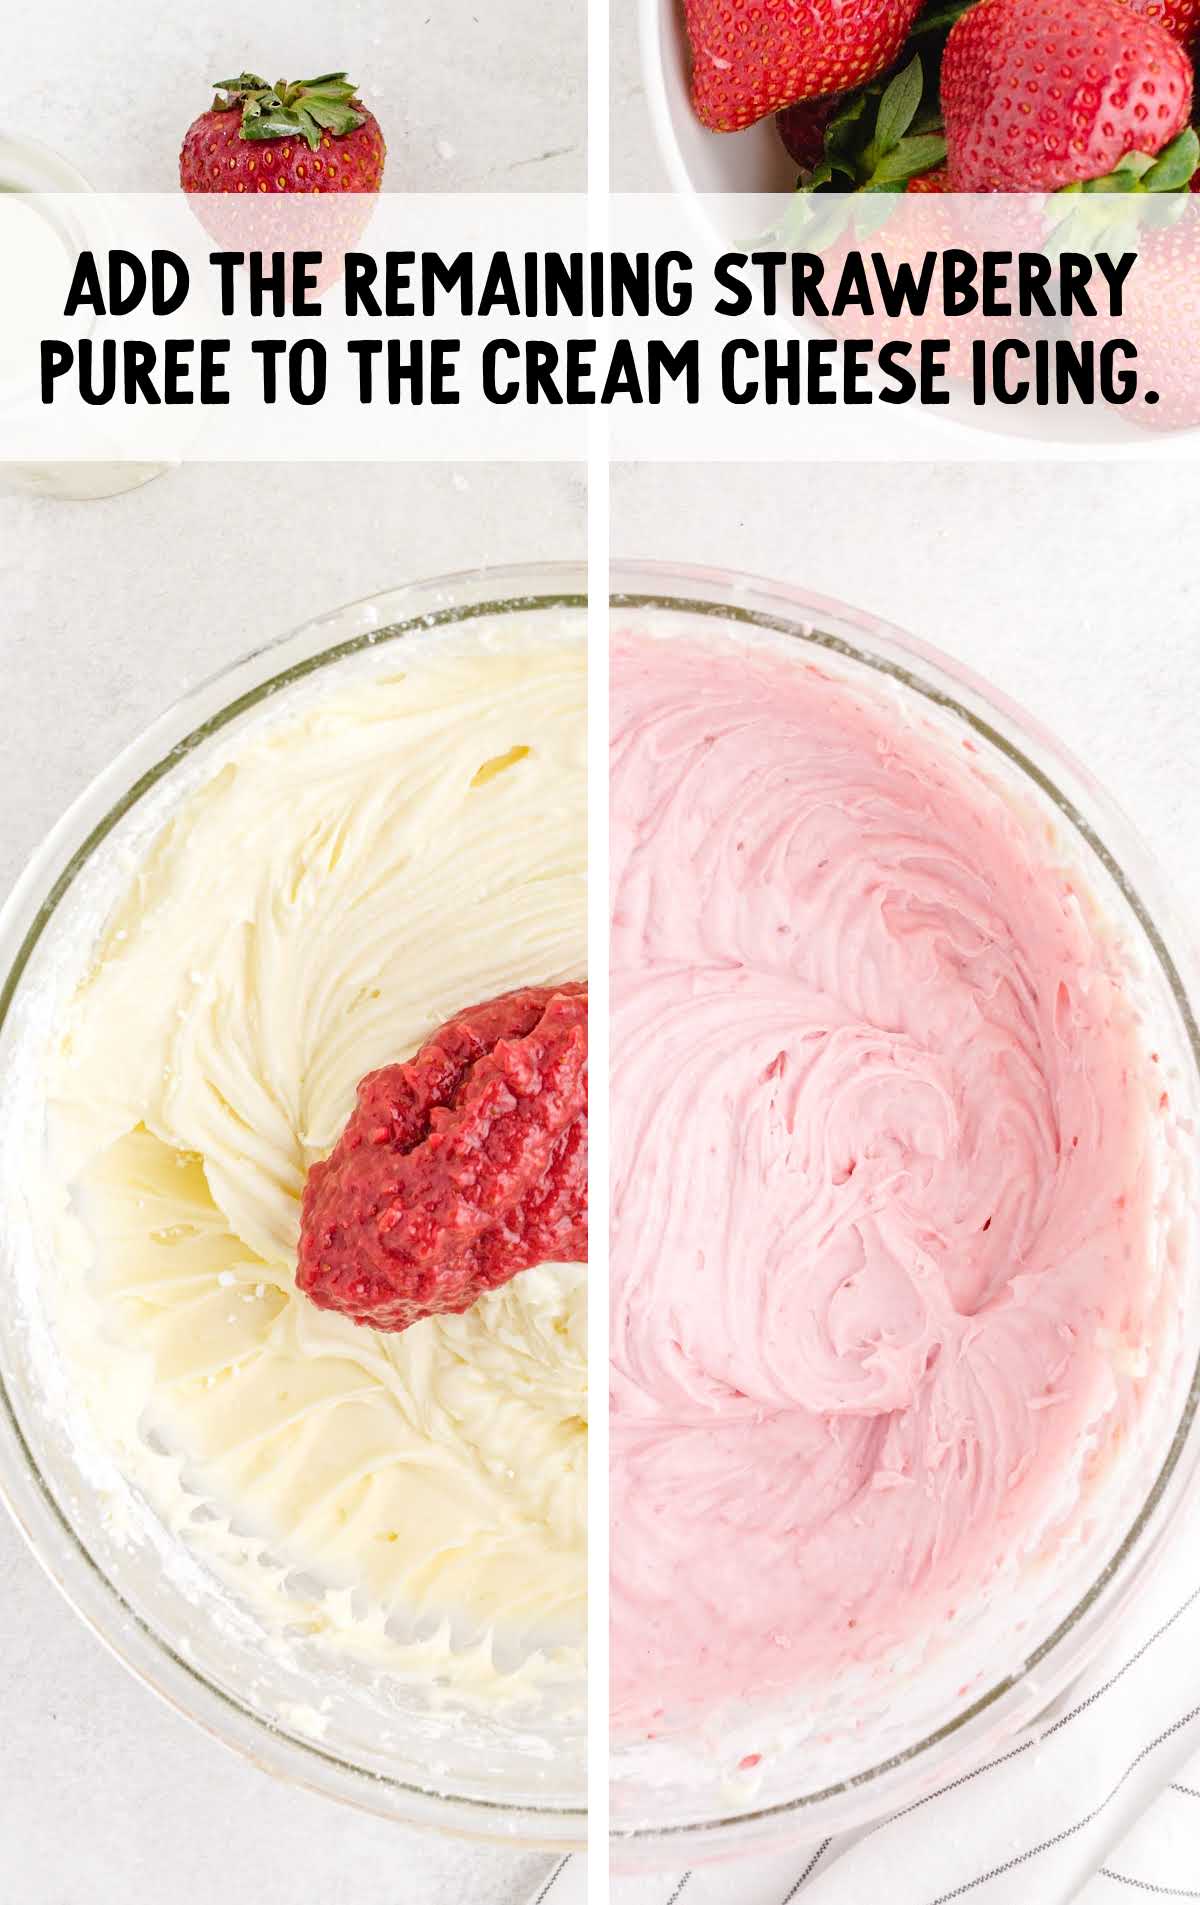 strawberry puree added to the cream cheese icing in a bowl